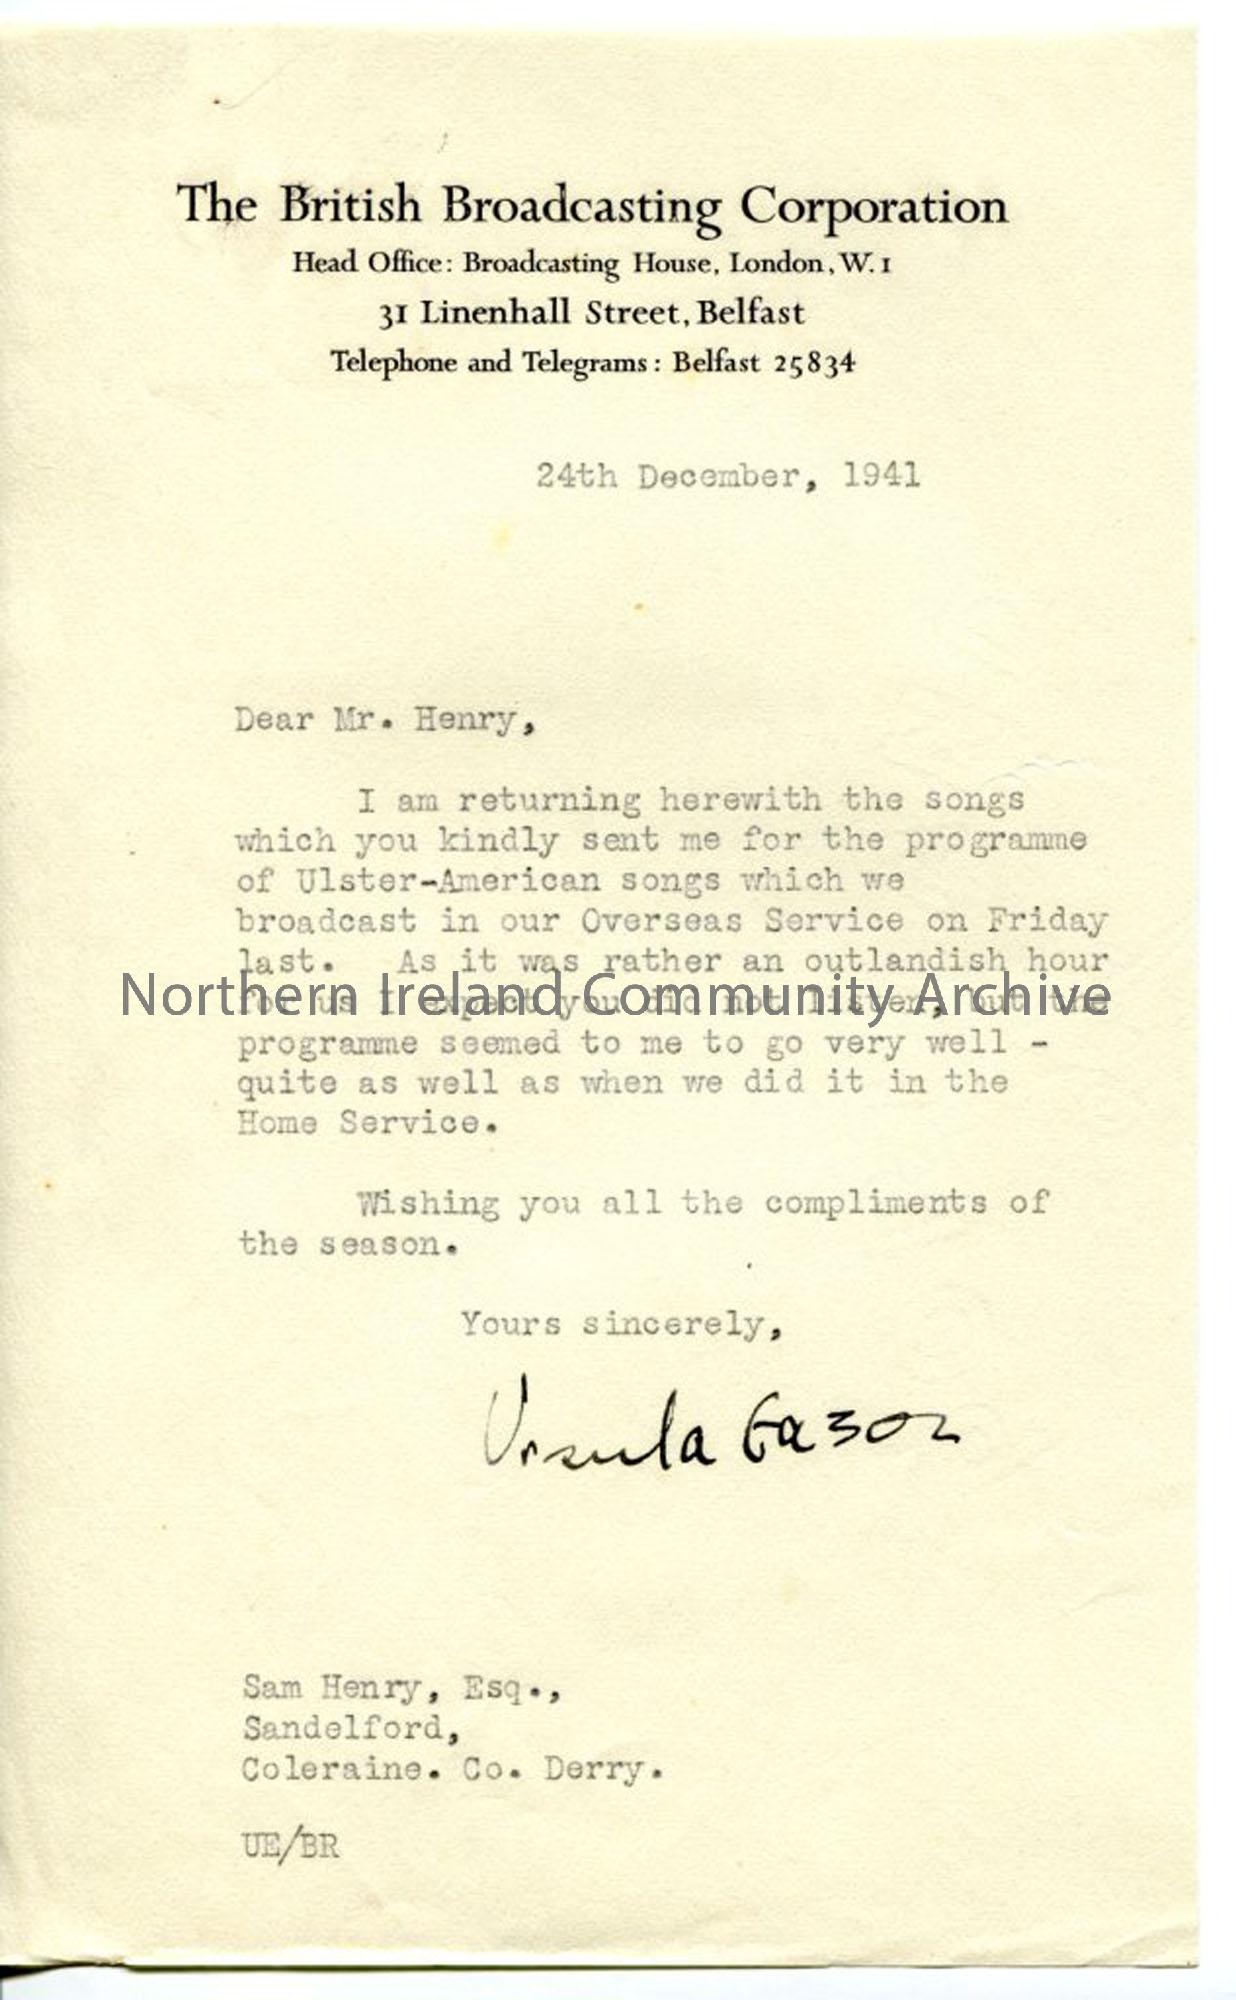 Letter from Ursula Eason, dated 24.12.1941